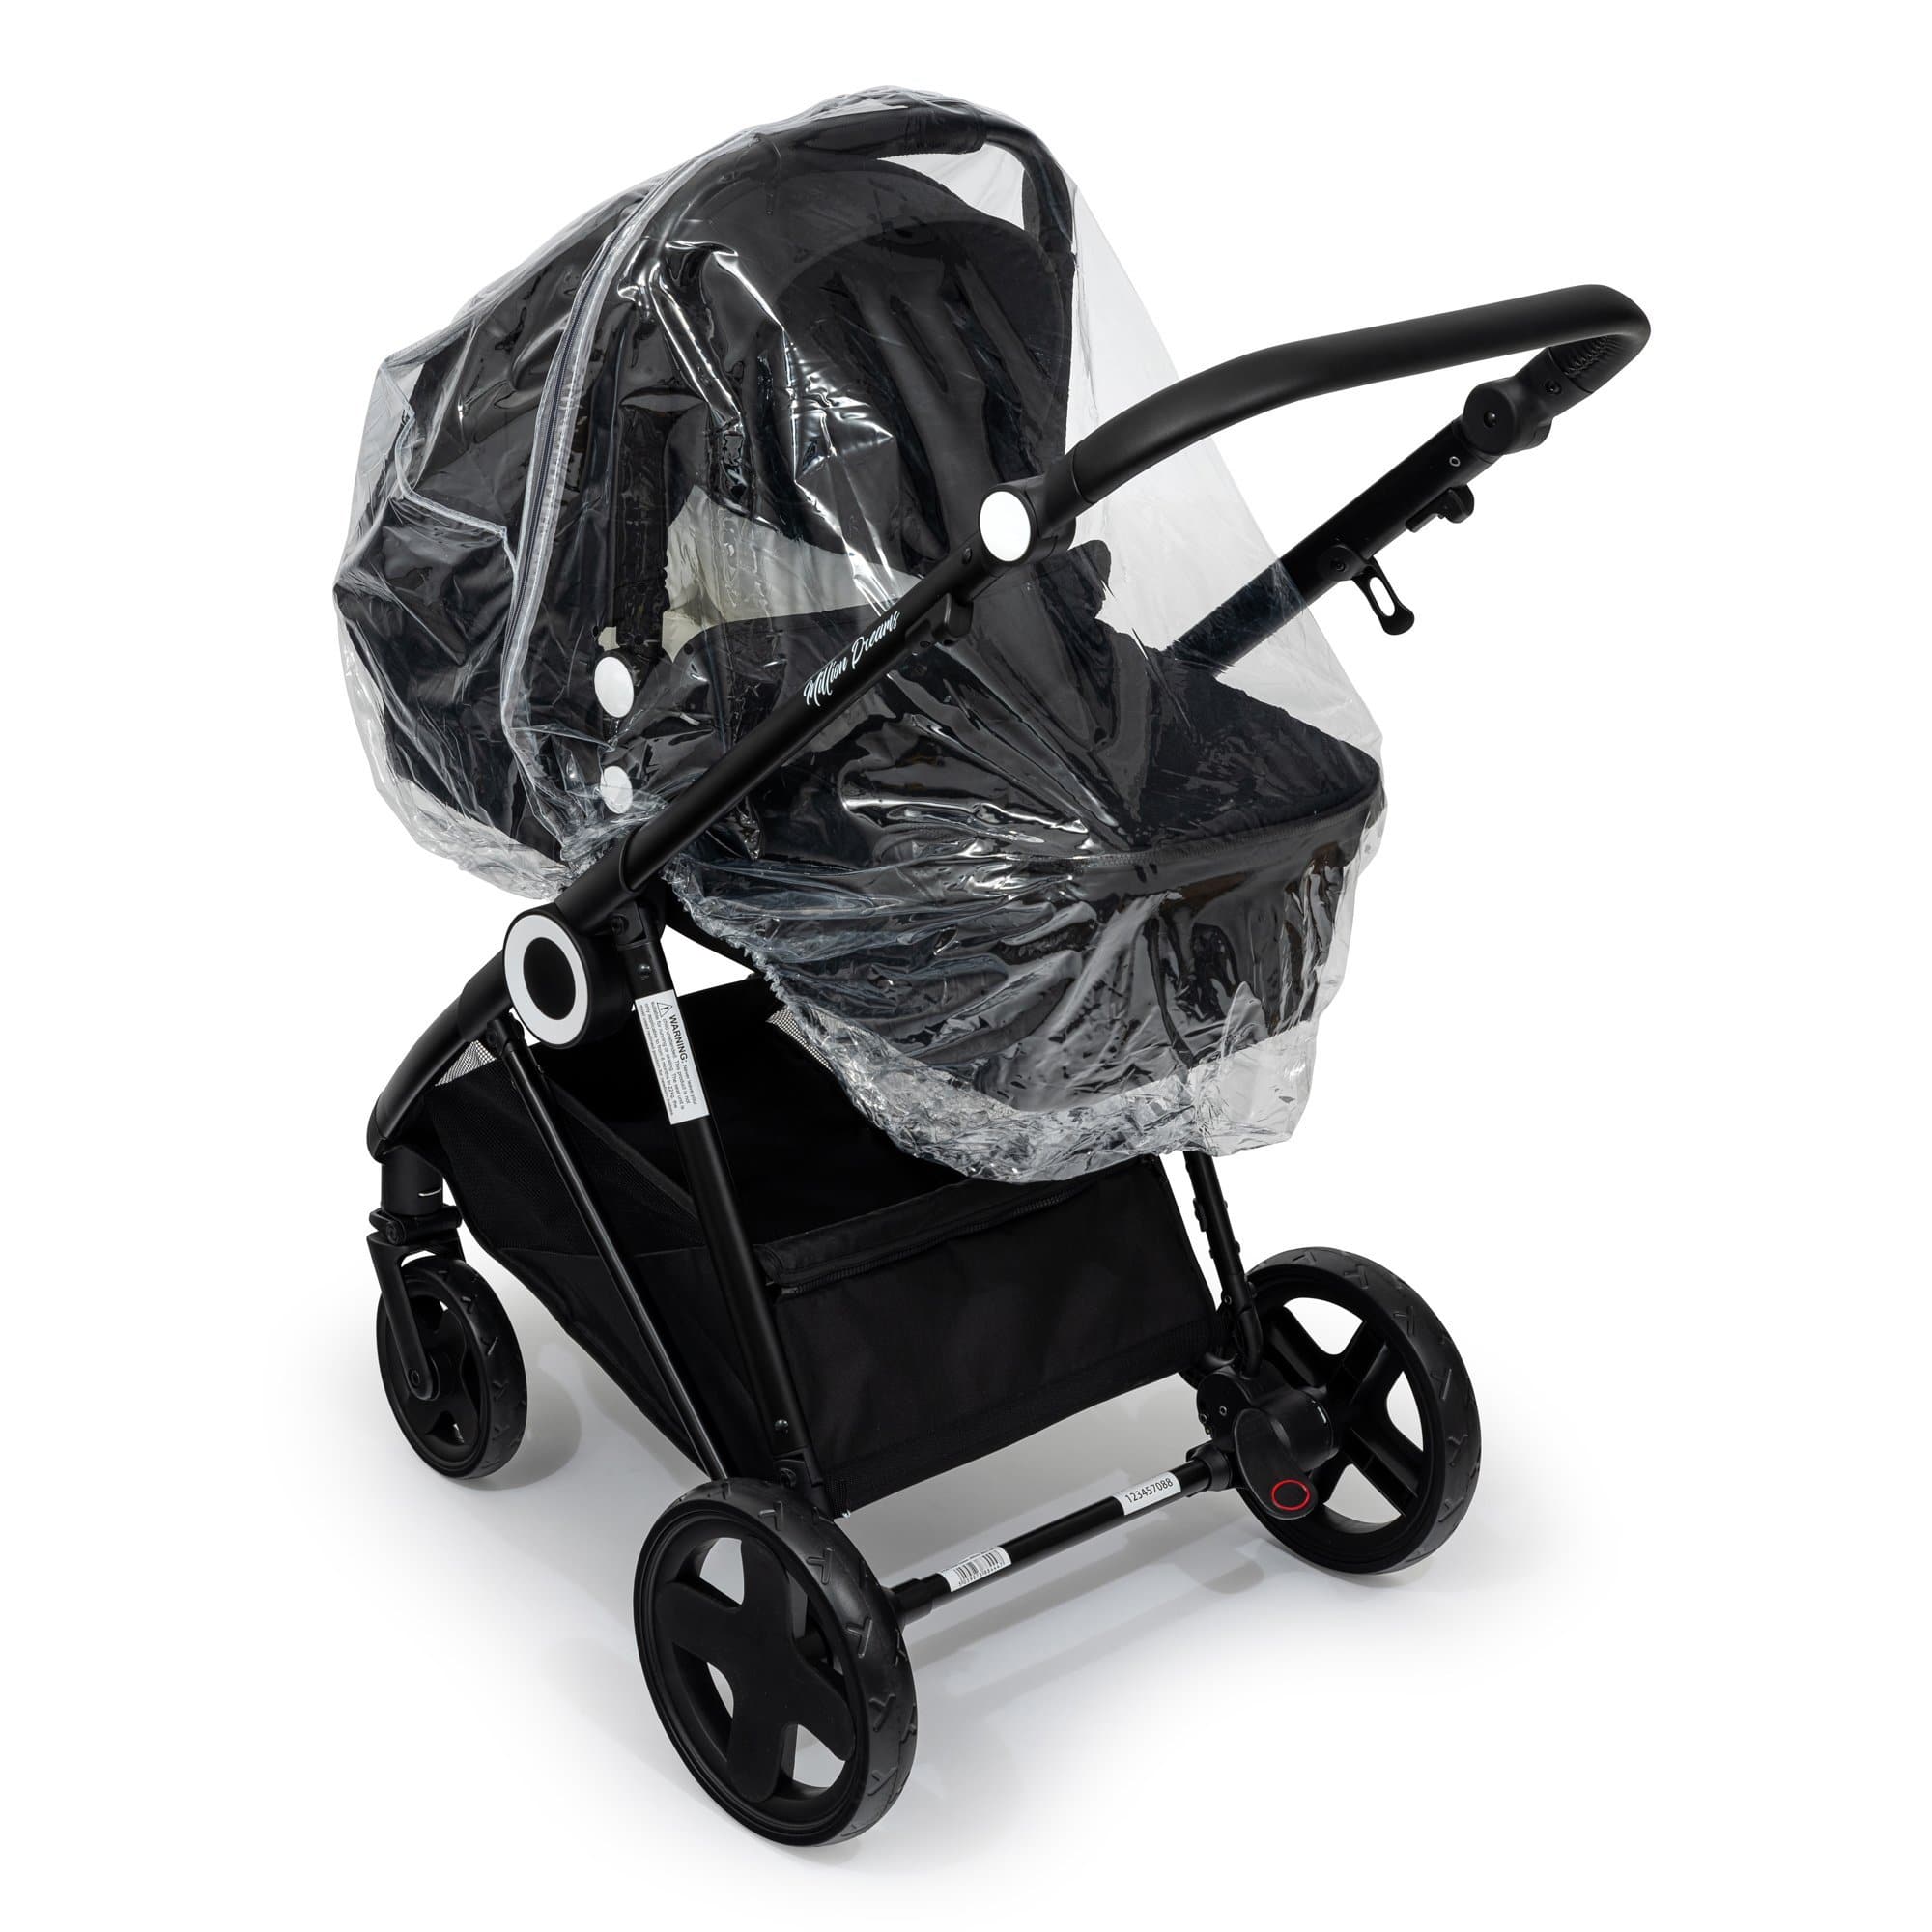 2 in 1 Rain Cover Compatible with Bebecar - Fits All Models -  | For Your Little One